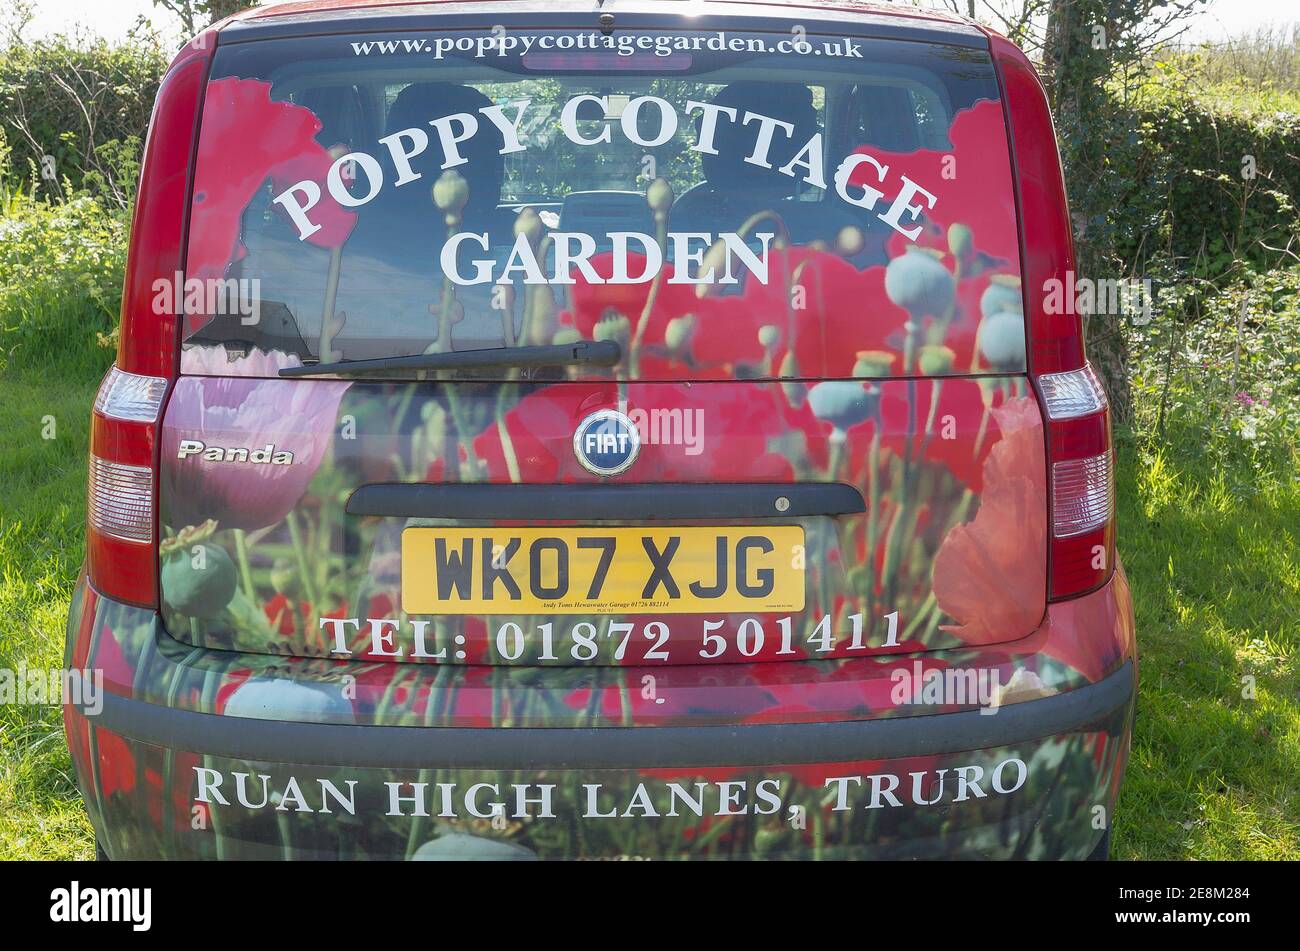 Colourful car used by previous owners of Poppy Cottage to promote garden open to visitors. New owners only operate garden workshops on the premises Stock Photo